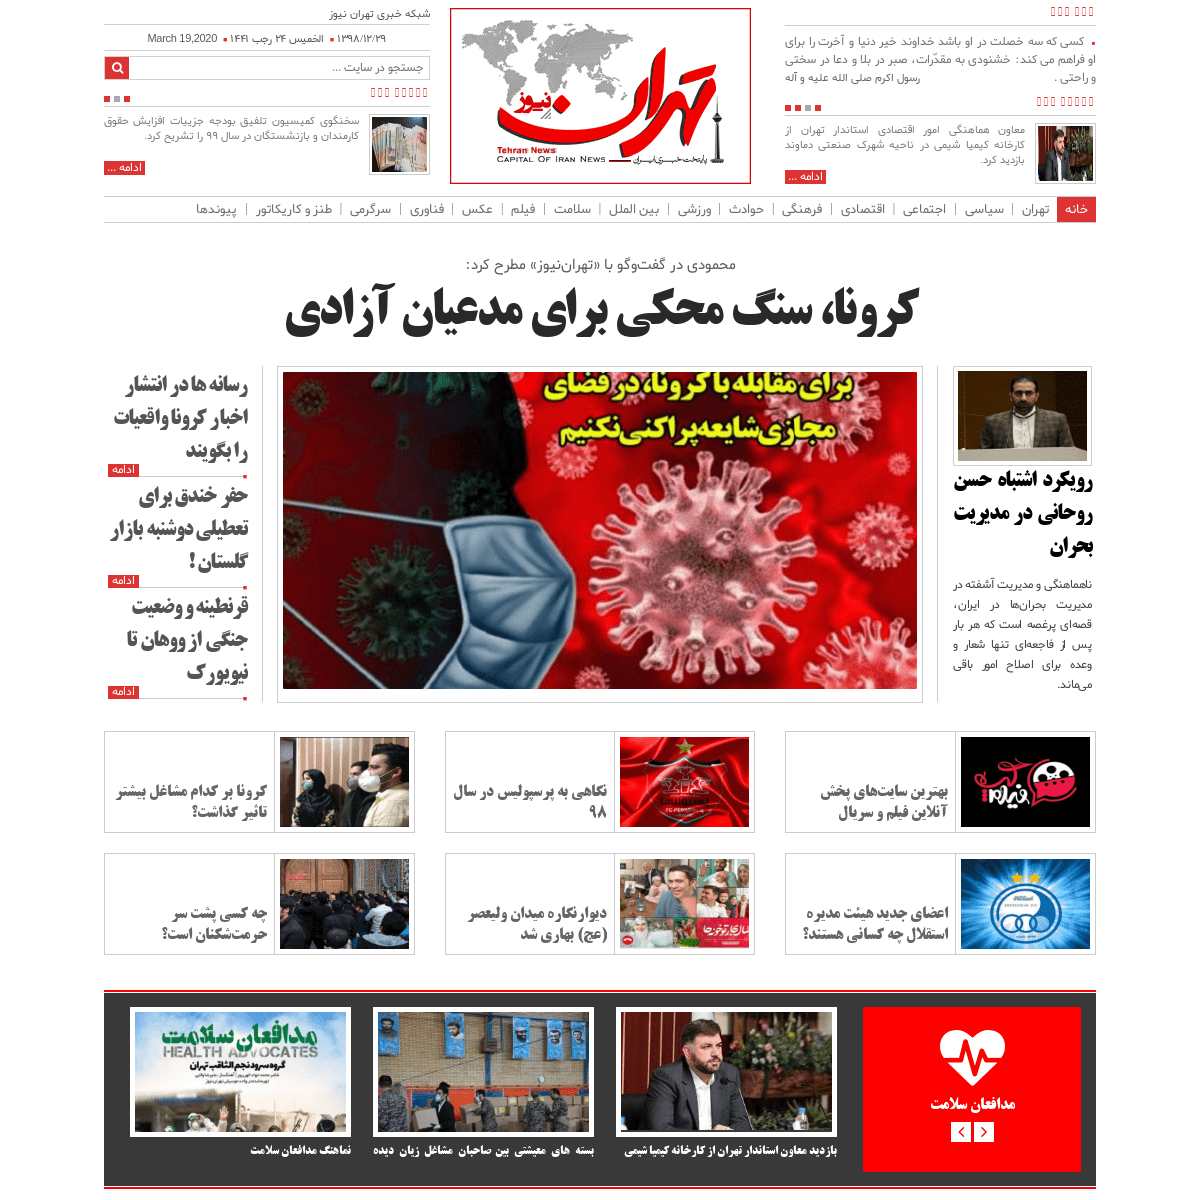 A complete backup of tehrannews.ir